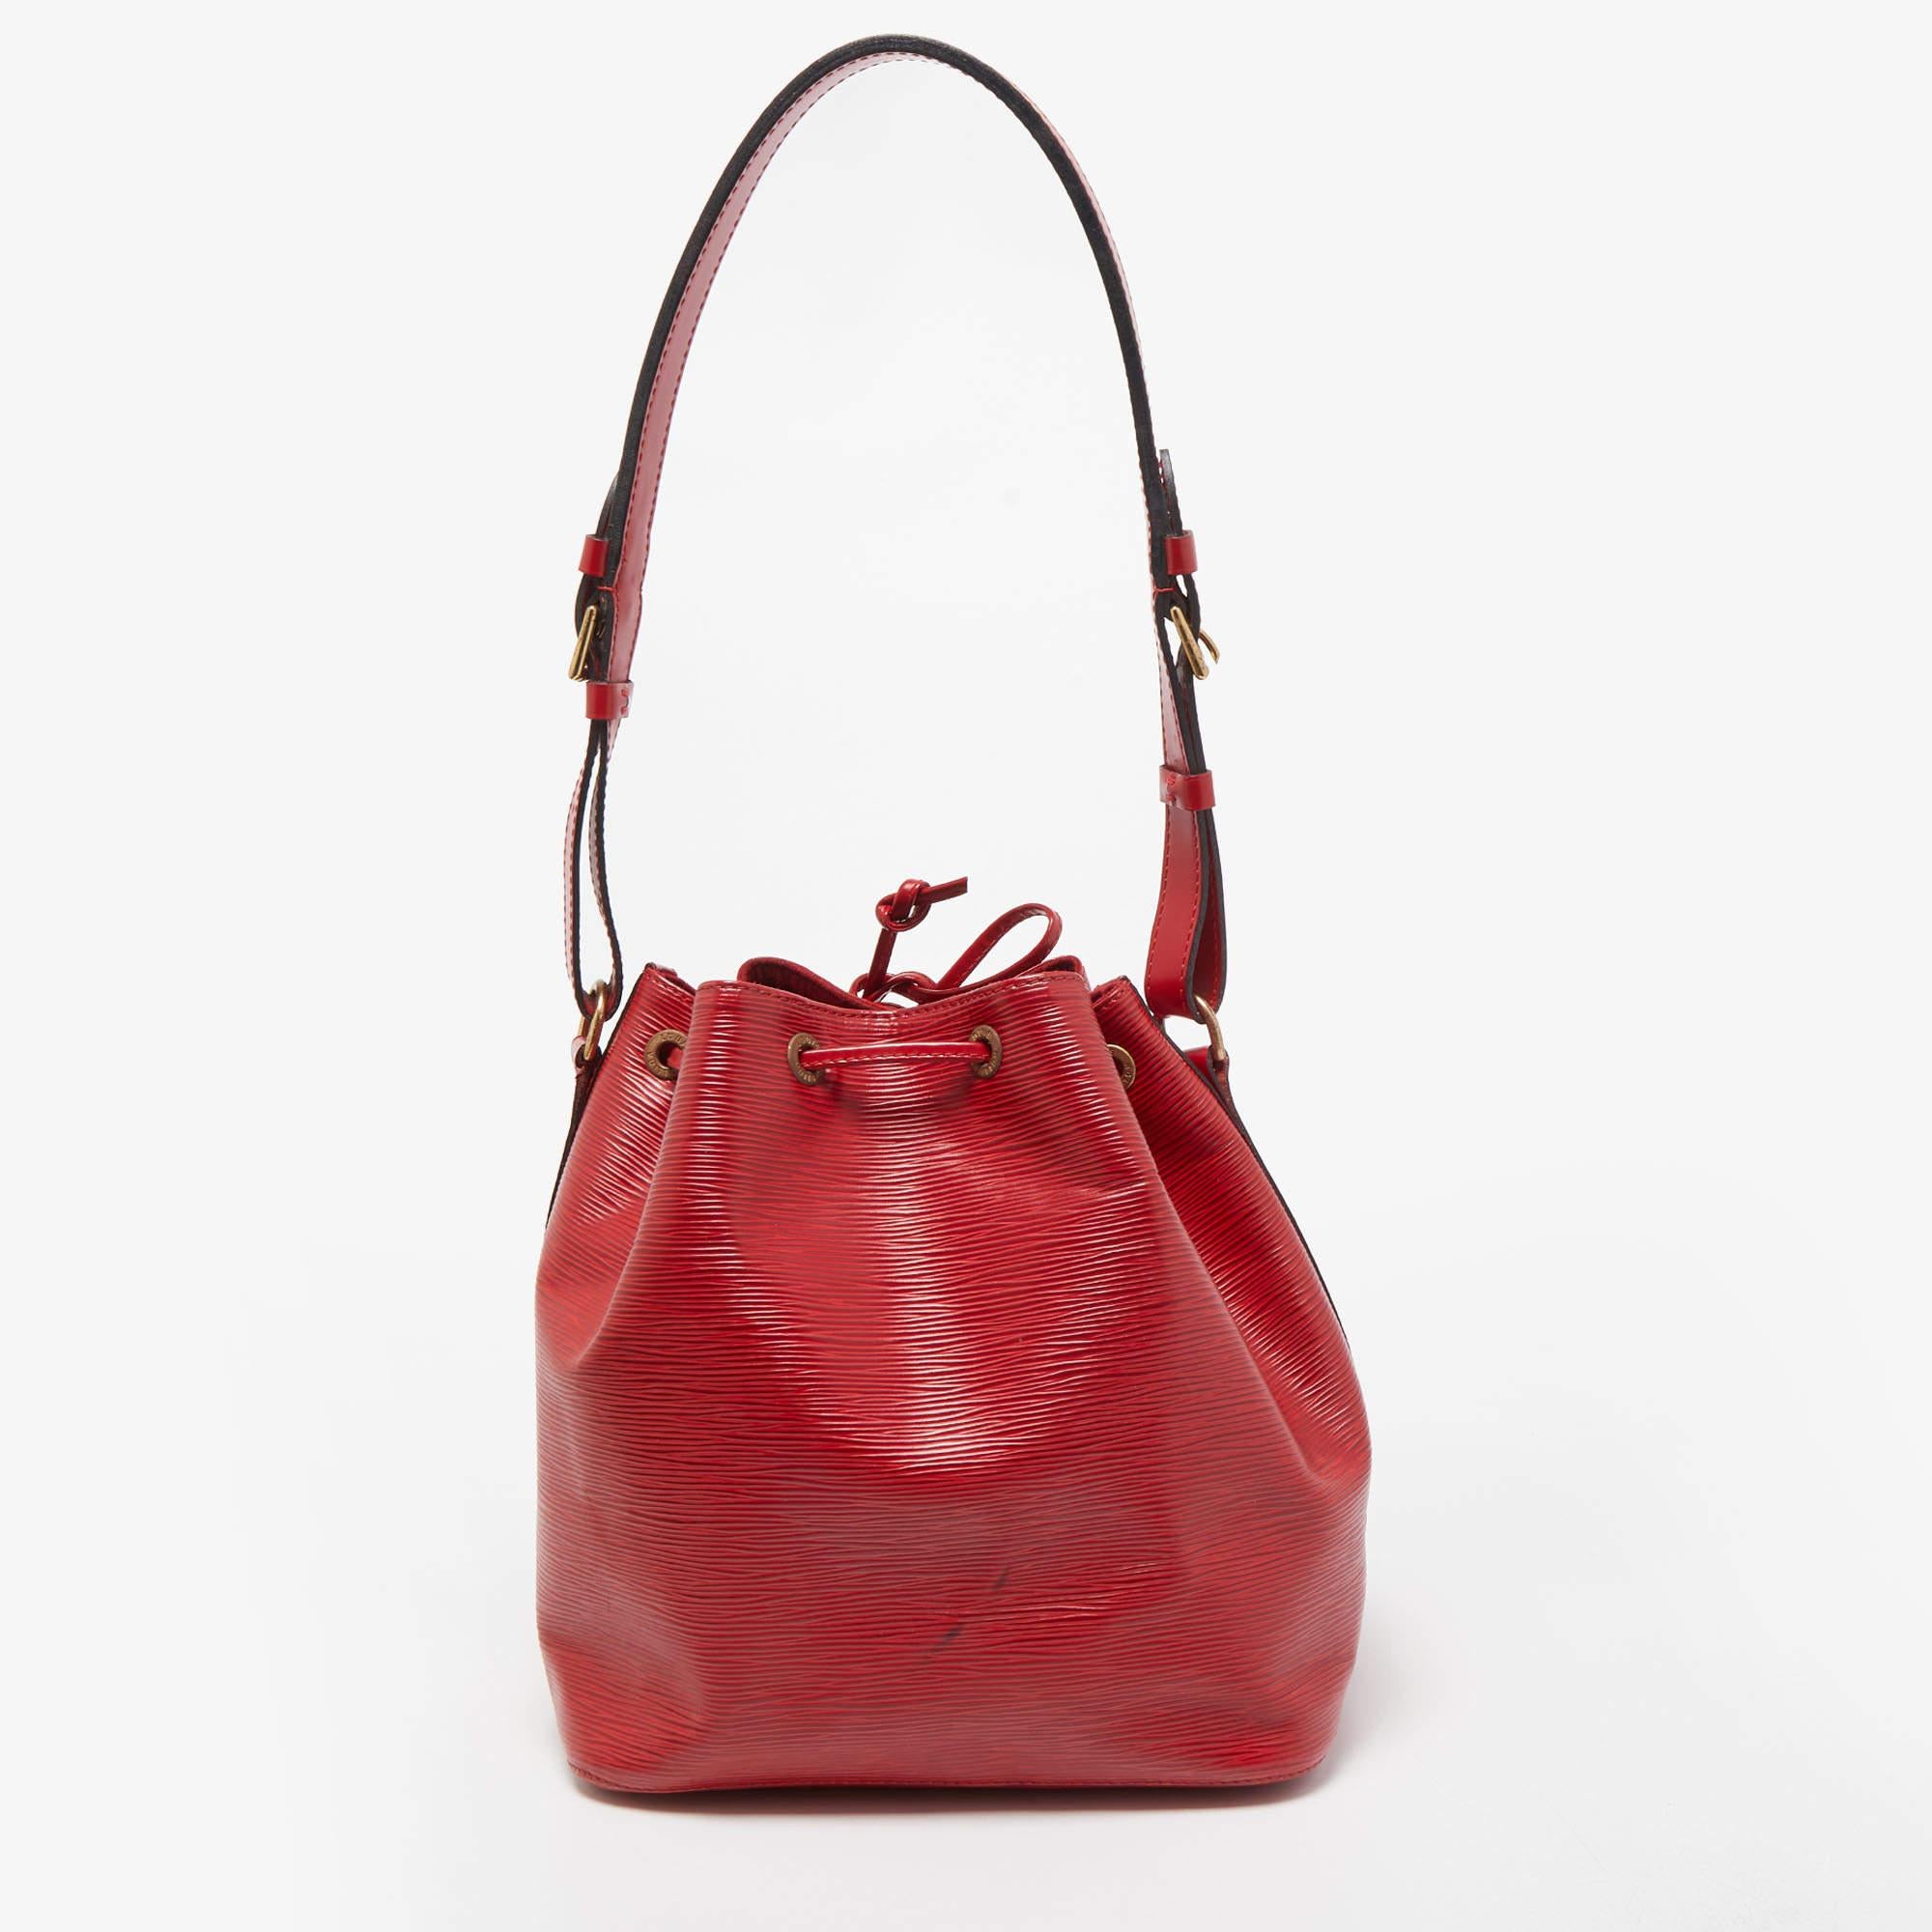 Created in 1932 by Louis Vuitton to carry bottles of Champagne, the iconic Noe now serves as a stylish daytime handbag. Crafted from red Epi leather, the bag exudes just the right amount of sophistication. It has a single adjustable strap, gold-tone